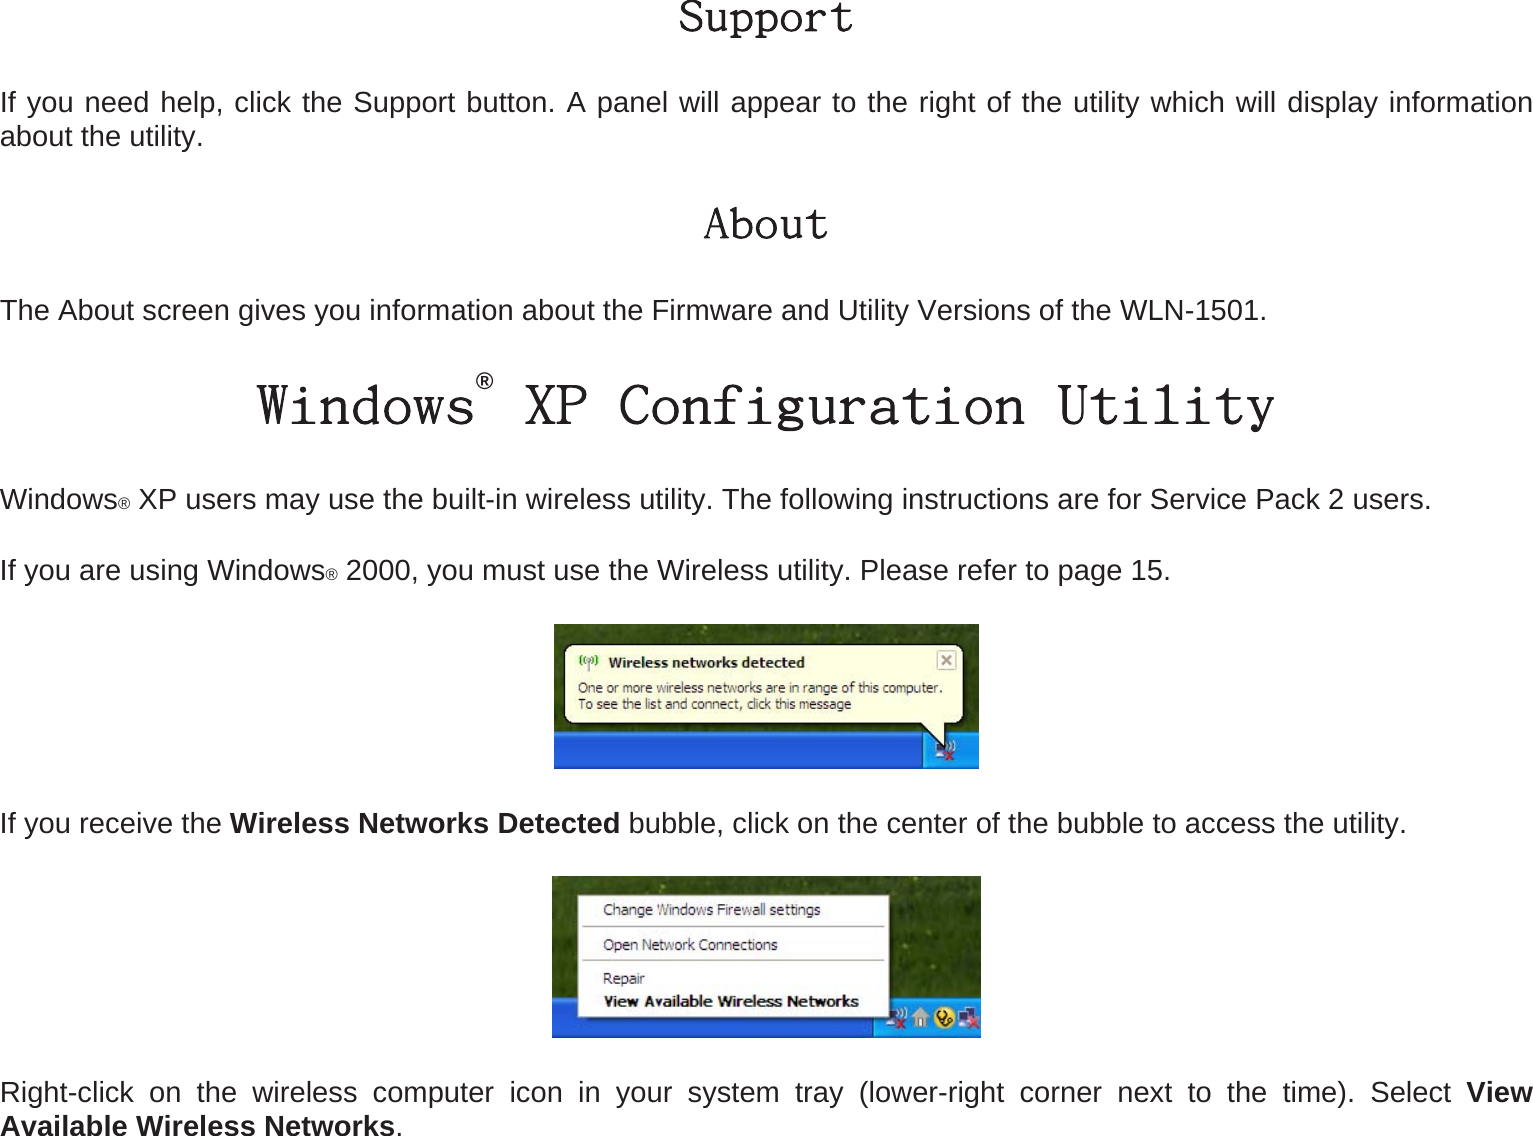 Support If you need help, click the Support button. A panel will appear to the right of the utility which will display information about the utility. About The About screen gives you information about the Firmware and Utility Versions of the WLN-1501. Windows® XP Configuration Utility Windows® XP users may use the built-in wireless utility. The following instructions are for Service Pack 2 users.   If you are using Windows® 2000, you must use the Wireless utility. Please refer to page 15.  If you receive the Wireless Networks Detected bubble, click on the center of the bubble to access the utility.  Right-click on the wireless computer icon in your system tray (lower-right corner next to the time). Select View Available Wireless Networks. 